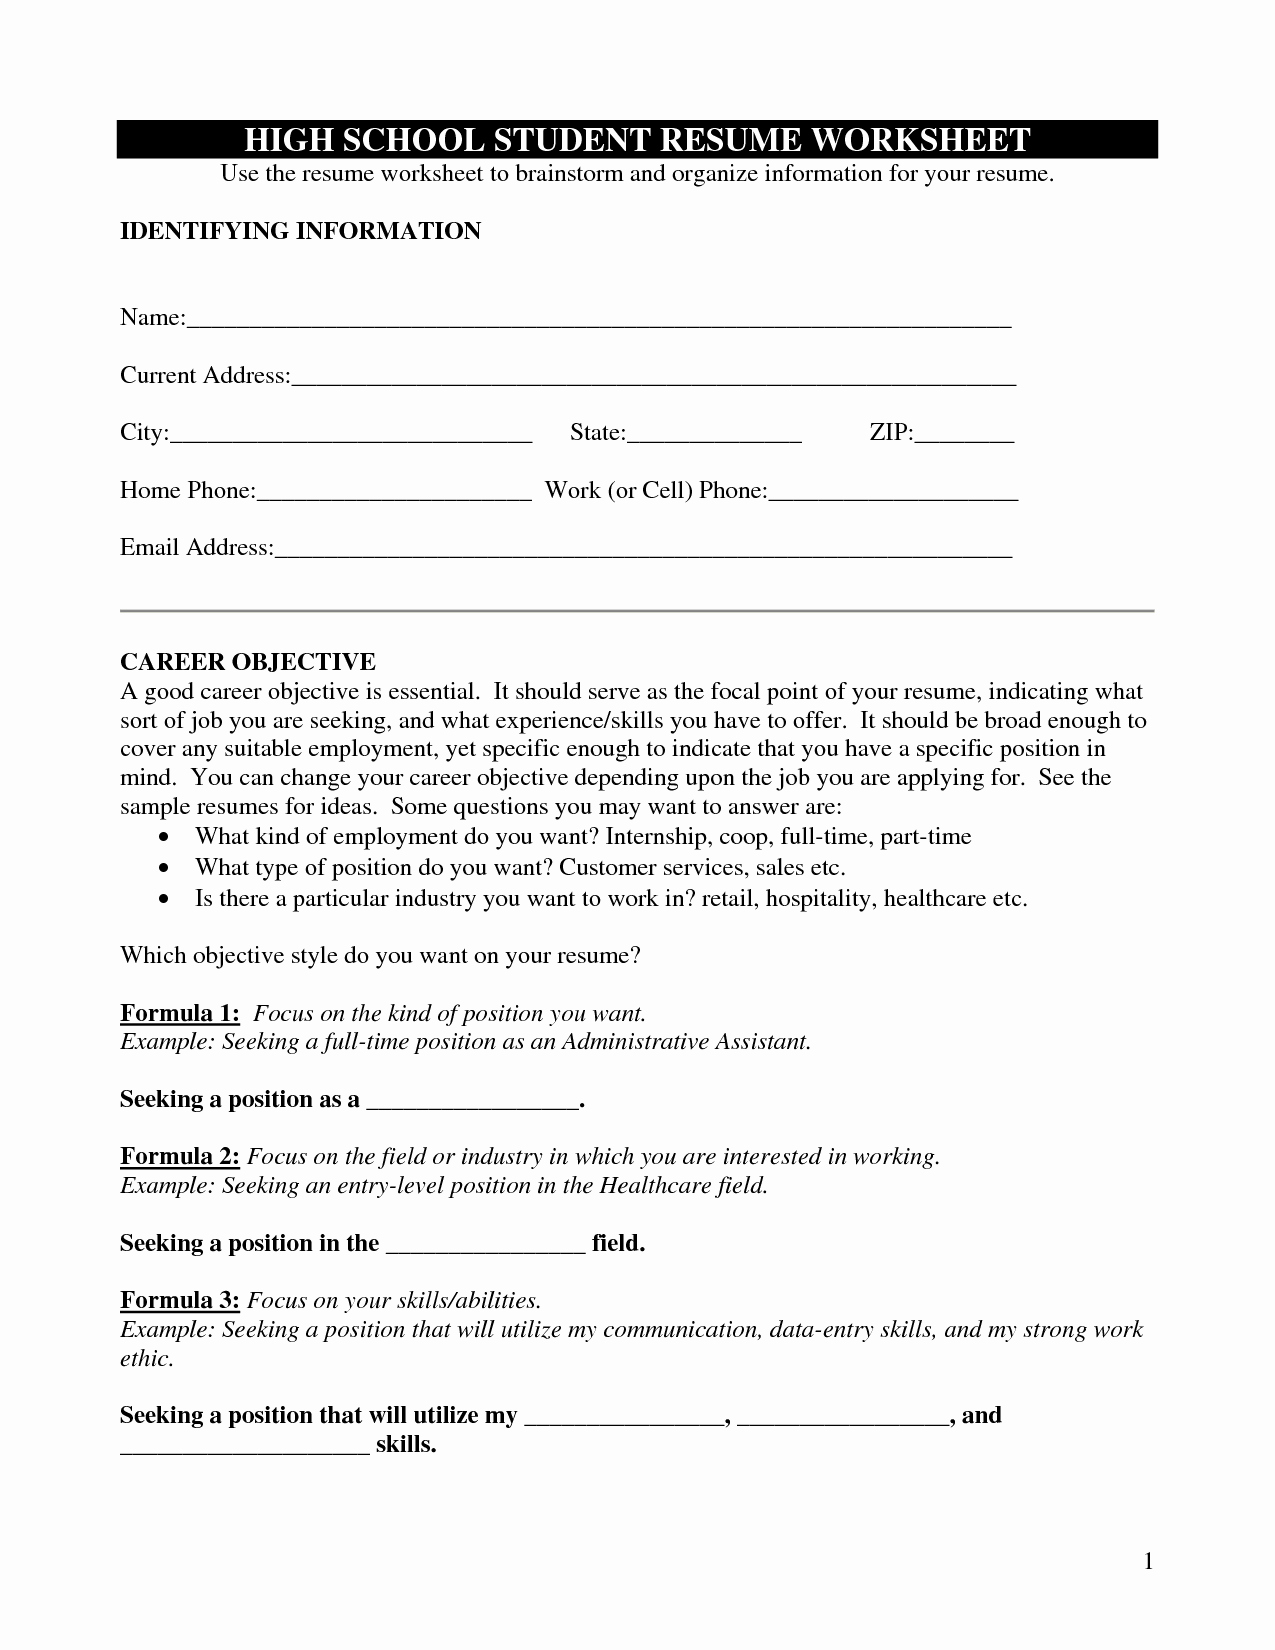 Resume for Highschool Students Unique 6 Best Of Worksheets for College Students High